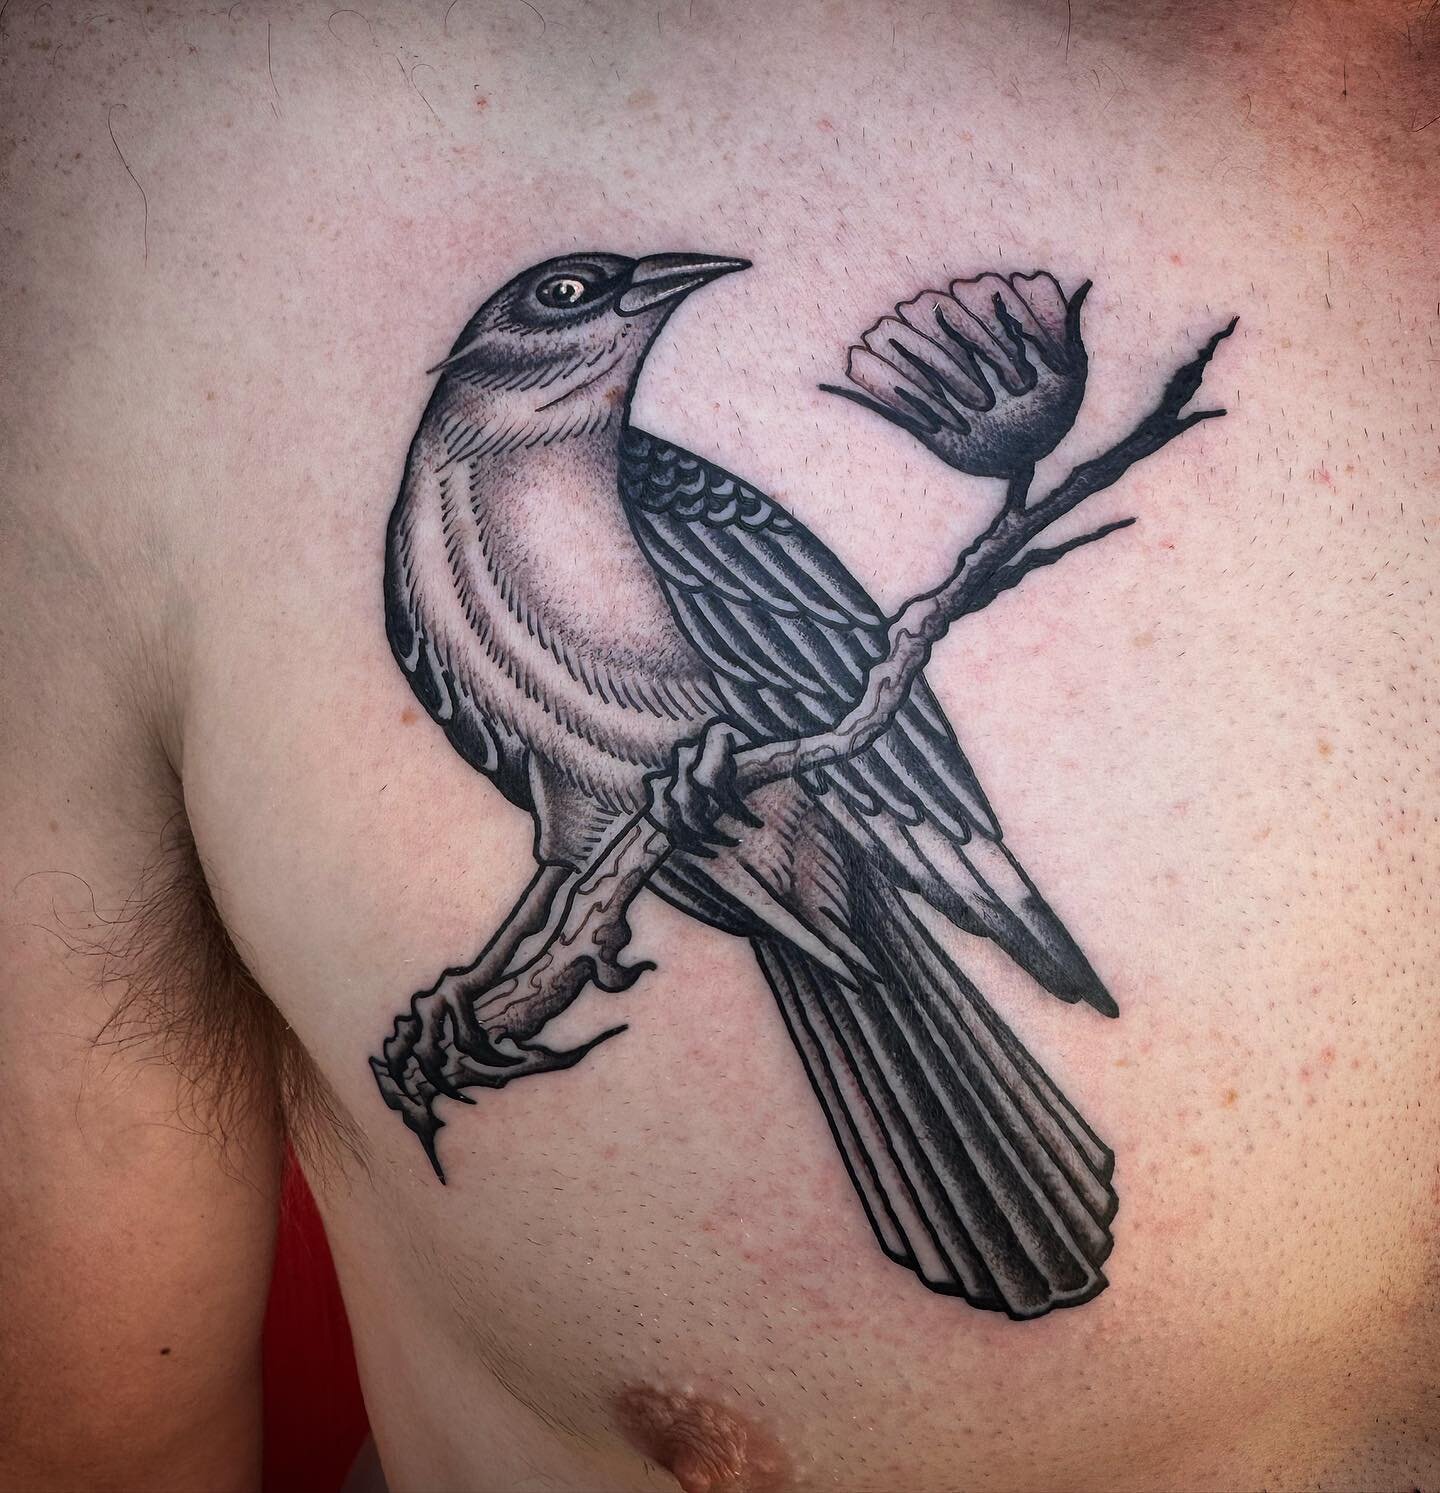 I love tattooing birds and or animals of any kind really. Email me at jtbtattoo to set up your next appointment. Thanks for looking!